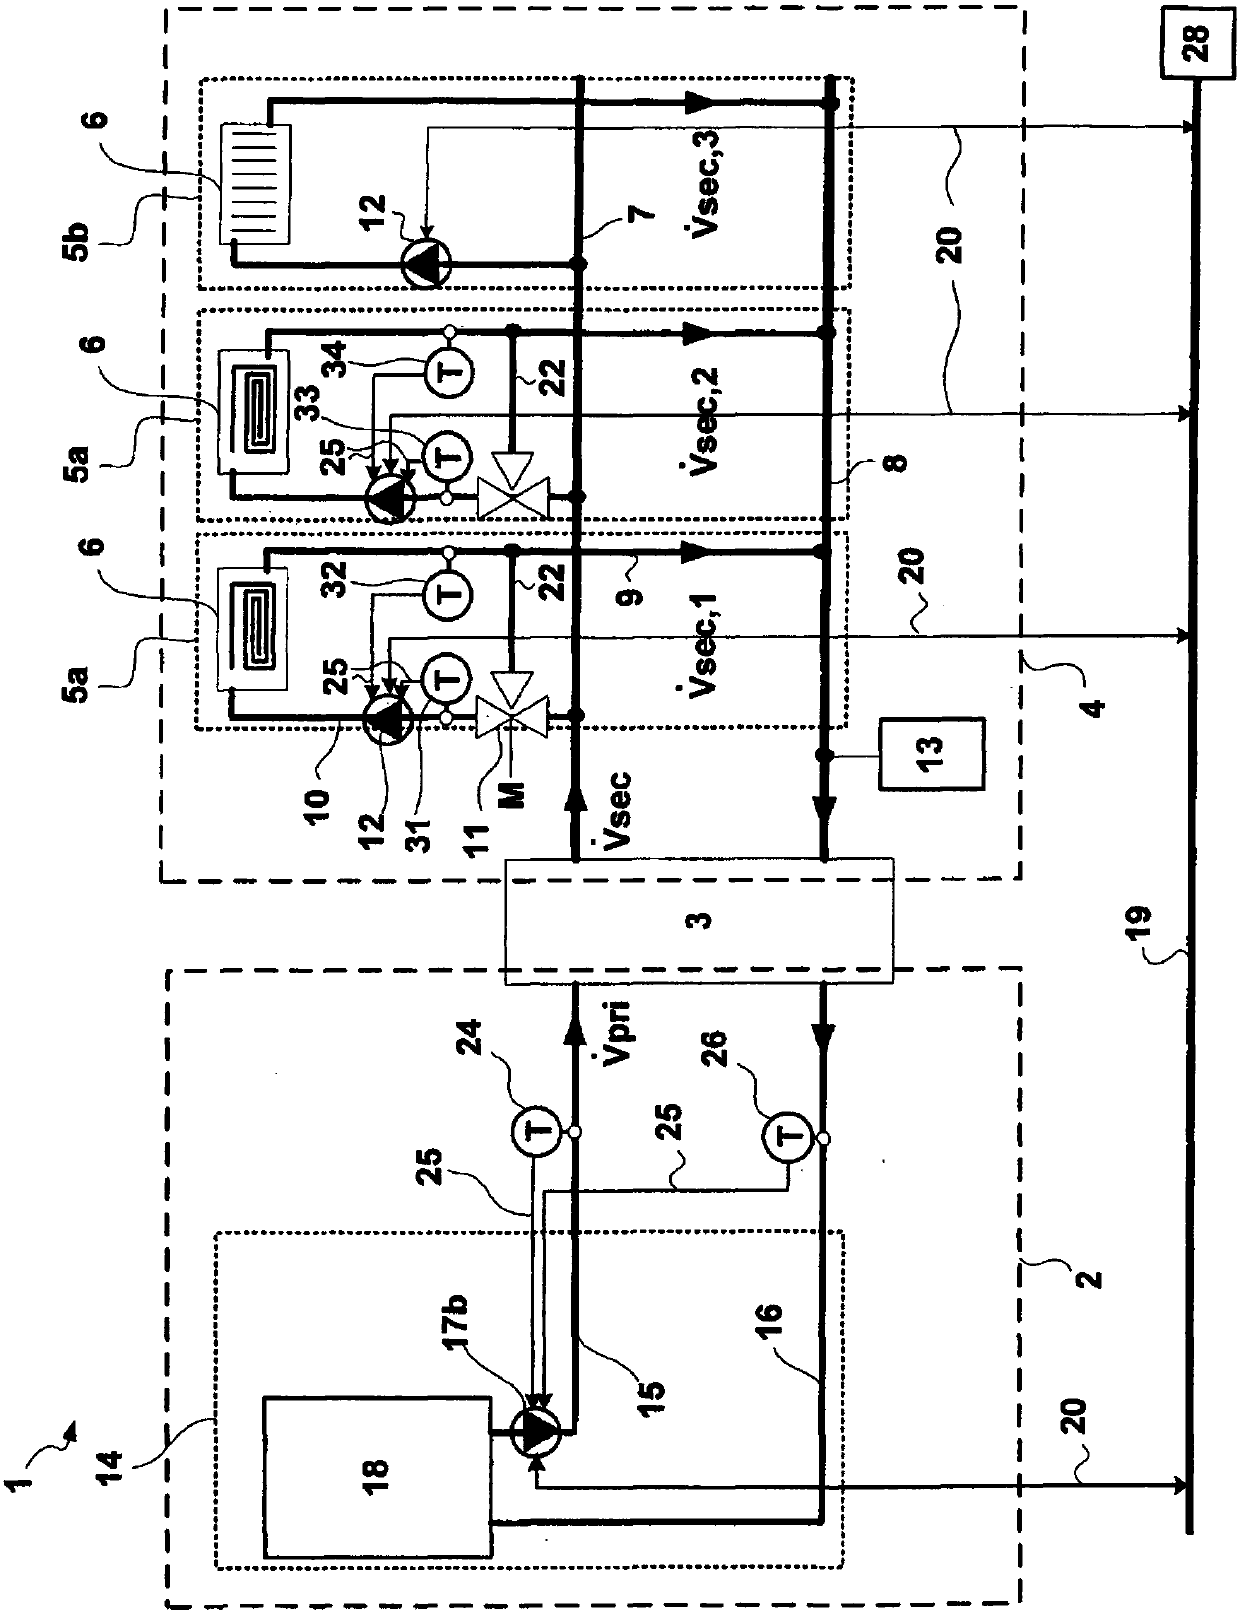 Method for controlling centrifugal pump, and associated pump system